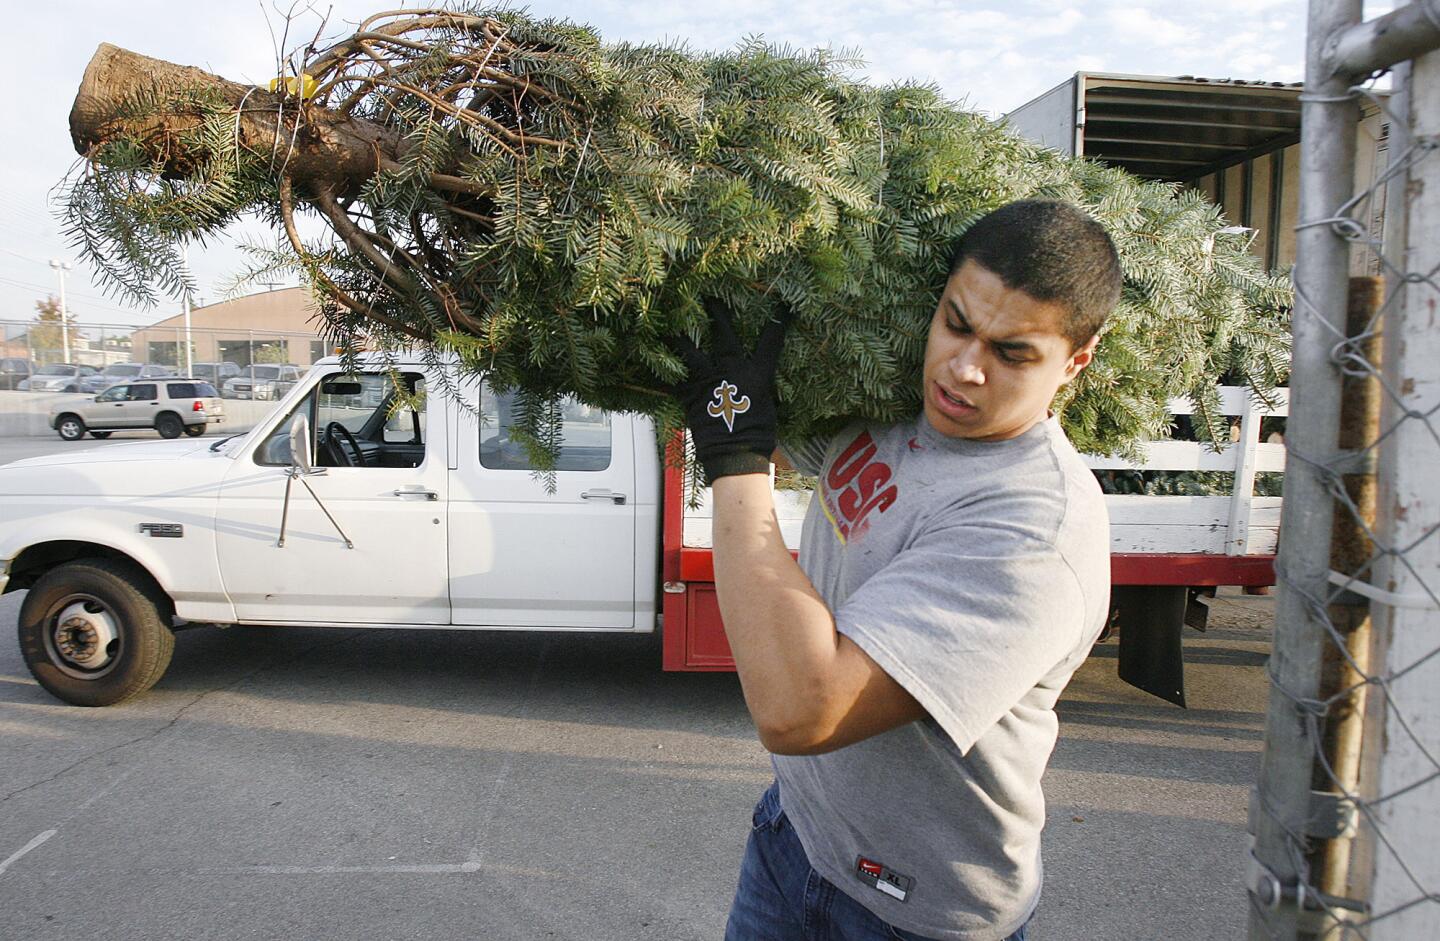 Casellas Christmas Trees gets first tree delivery